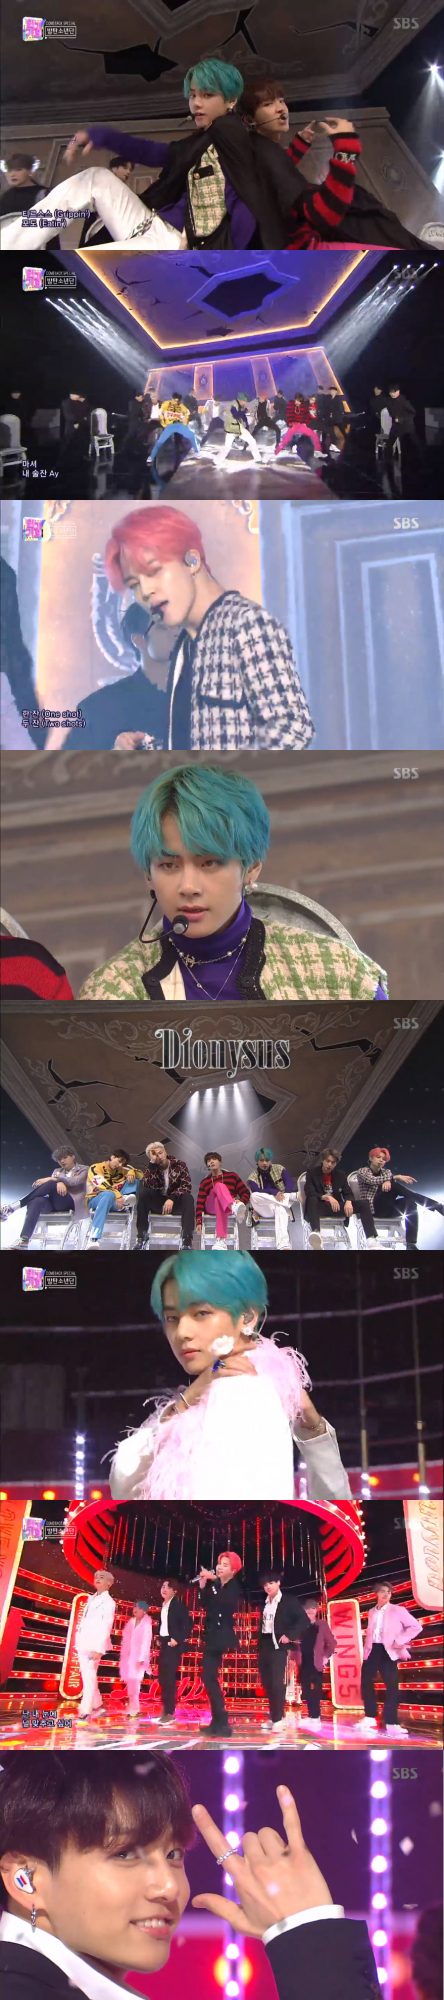 Group BTS caught the eye by showing a fantastic stage on SBS Inkigayo.BTS staged a comeback with two songs, Dionysus and Poetry for Small Things, on Inkigayo, which aired on the 21st.BTS, who had an interview before the stage, introduced the album directly: Its Amie itself, like a fan letter to Amie, RM said, expressing his love for fans.When asked if he wanted anything, Vue said, I told him it happened in the morning, but (the members) no one answered me.When asked what home was to BTS, the members gathered their mouths and shouted Ami.BTS came to the stage wearing luxurious and colorful costumes and drew cheers with its intense performance Dionysus.In the following Poetry for Small Things stage, the members appeared in black and white neat suits, applauded for their sophisticated choreography and emotional lyrics.Black Pink beat Chen and Red Puberty with Kill Dis Love, winning first place with a total score of 8163.The rankings were determined by combining music, SNS, viewer pre-voting, live broadcasting, and online music scores.On this day, Inkigayo featured BTS, Super Junior-D&E, Yongju, Holiday, Pentagon, Aizwon, Stray Kids, Momoland, Dia, Everglow, Dream Note, JBJ95, Bandit, Wonder Nine and Kang Siwon.